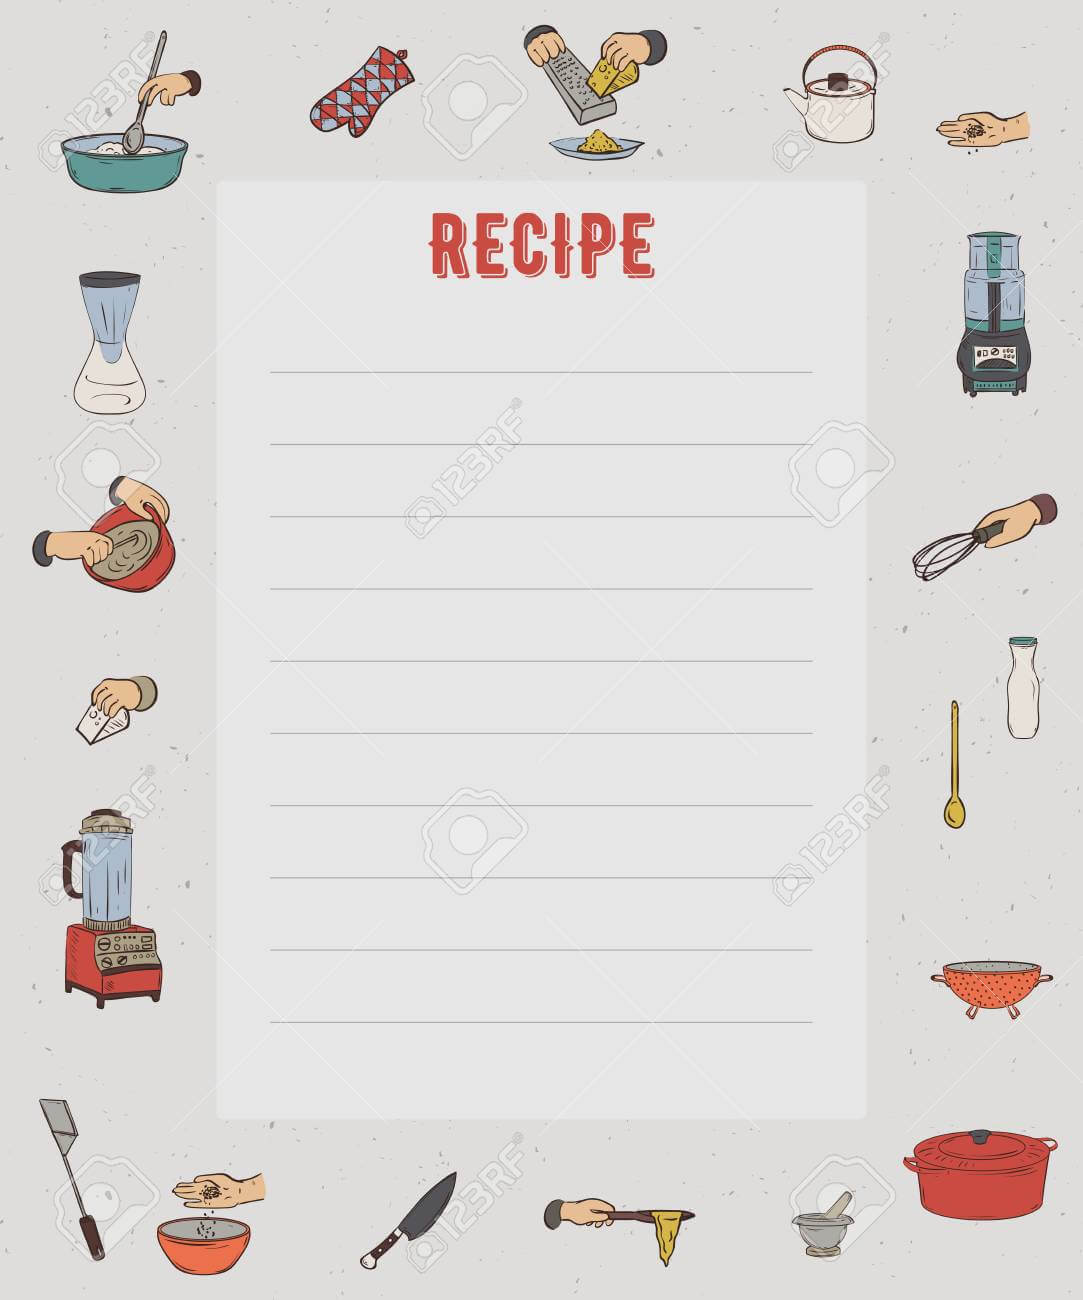 Recipe Card. Cookbook Page. Design Template With Kitchen Utensils.. With Restaurant Recipe Card Template